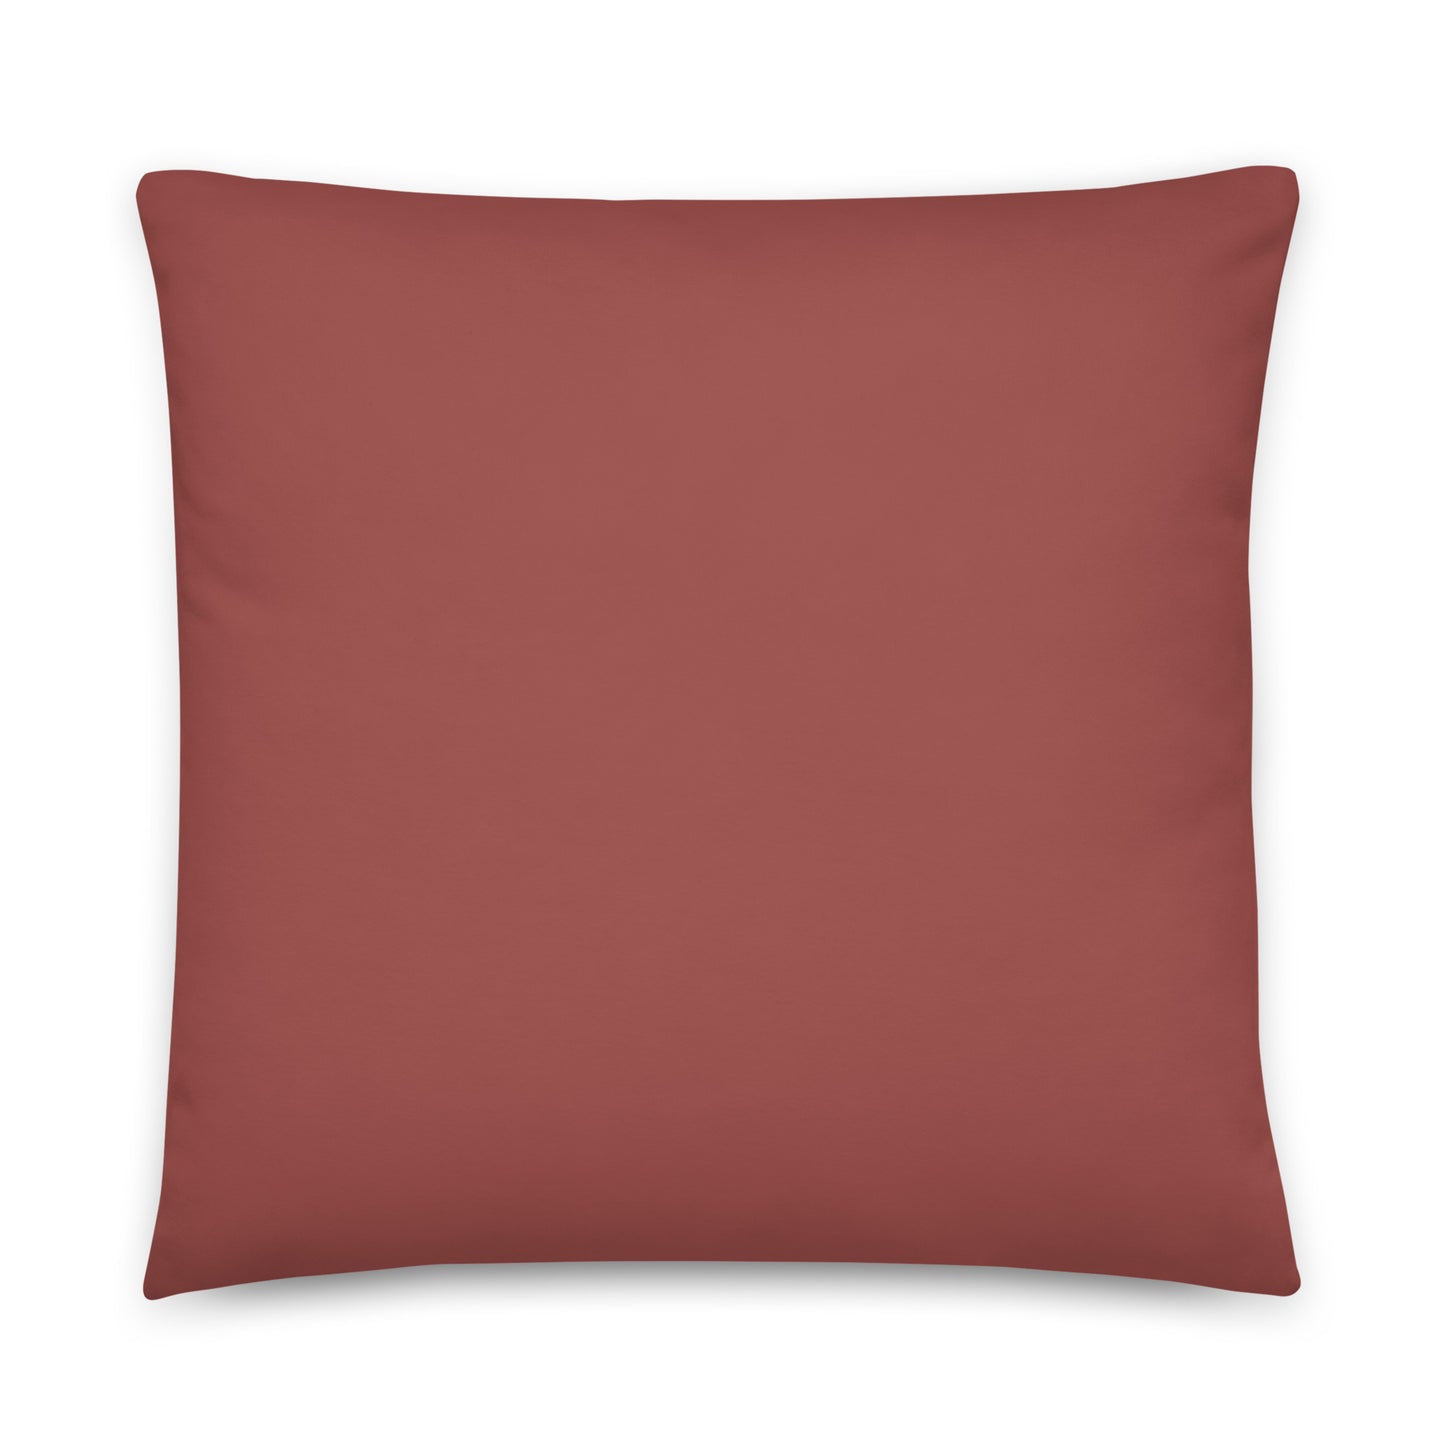 Basic Reddish Brown - Sustainably Made Pillows